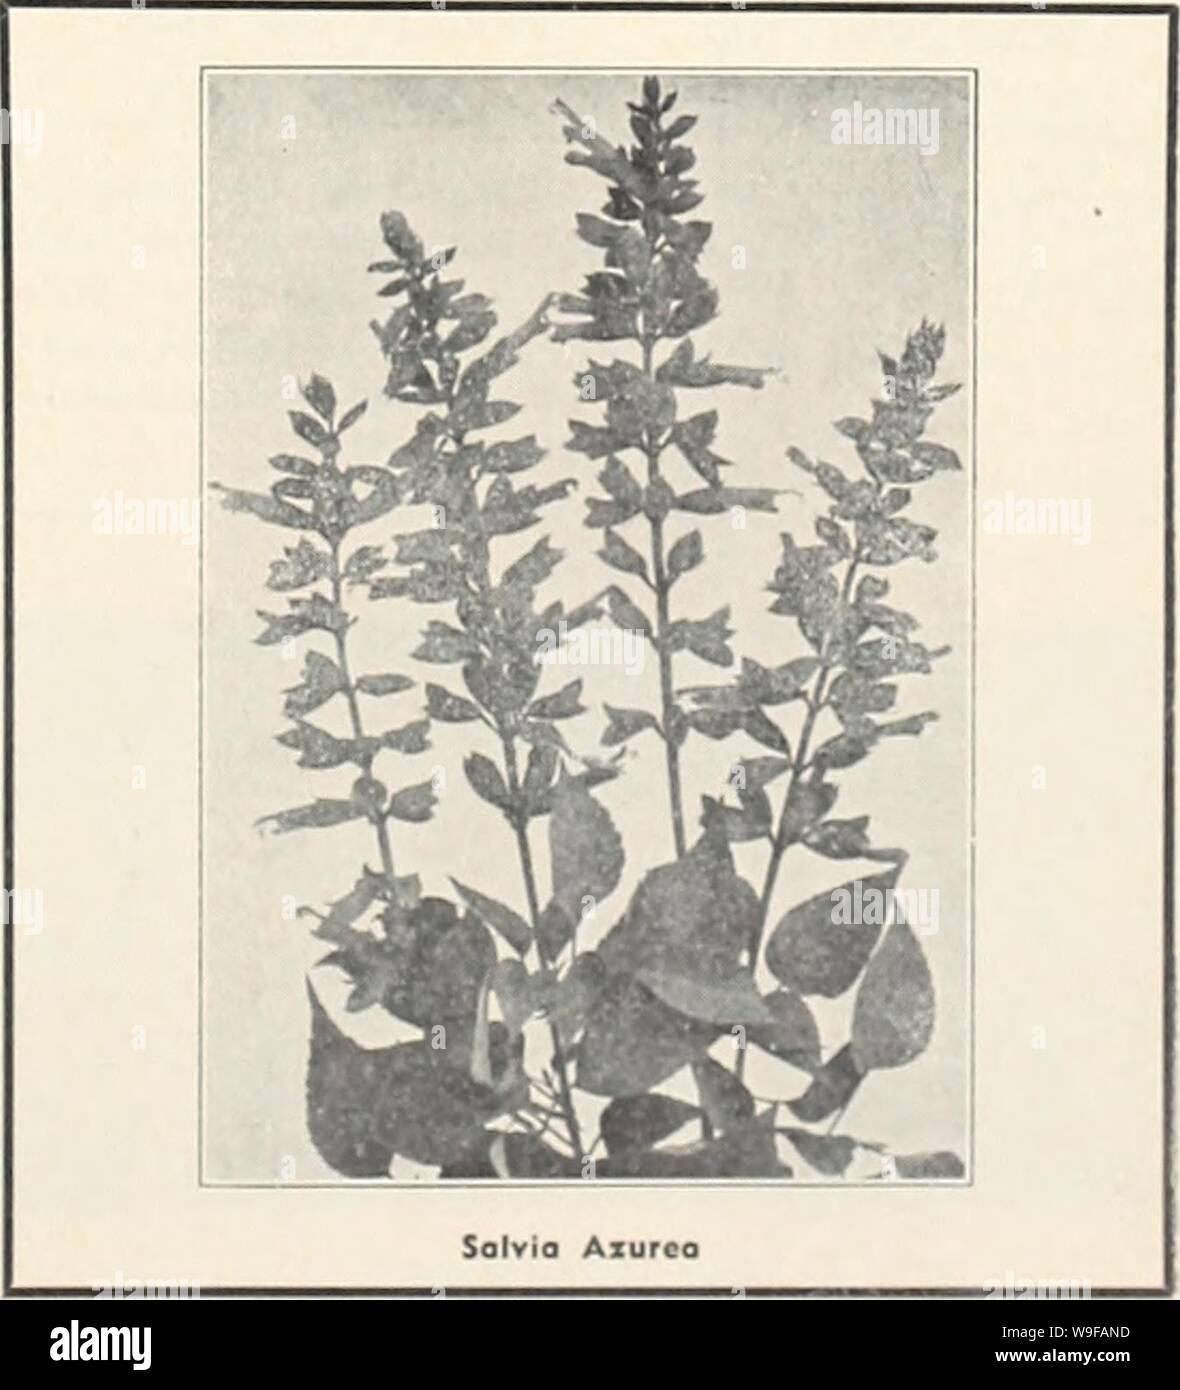 Archive image from page 26 of Currie's garden annual (1941). Currie's garden annual  curriesgardenann19curr 6 Year: 1941 ( SILENE (Cotchfly) PENDULA COMPACTA — Dwarf, hardy perennial, pretty pink flowers; 6'. Pkt., 10c. SCHAFTA (Autumn Catchtlyl — Masses of bright pink flowers from July to October. Plants, 25c; seeds, Pkt., 15e. ALPESTRIS—Dwarf rock plant, 4' high, pure white flowers in May and June. Plants, 25c; doz., S2.50. STATICE &lt; Sec Lavender) LATIFOLIA—Tufts of leathery leaves, large heads of purplish- blue flowers. Plants, 25c; doz., $2.50; seeds, Pkt., 10c. DUMOSA—Densely packed cu Stock Photo